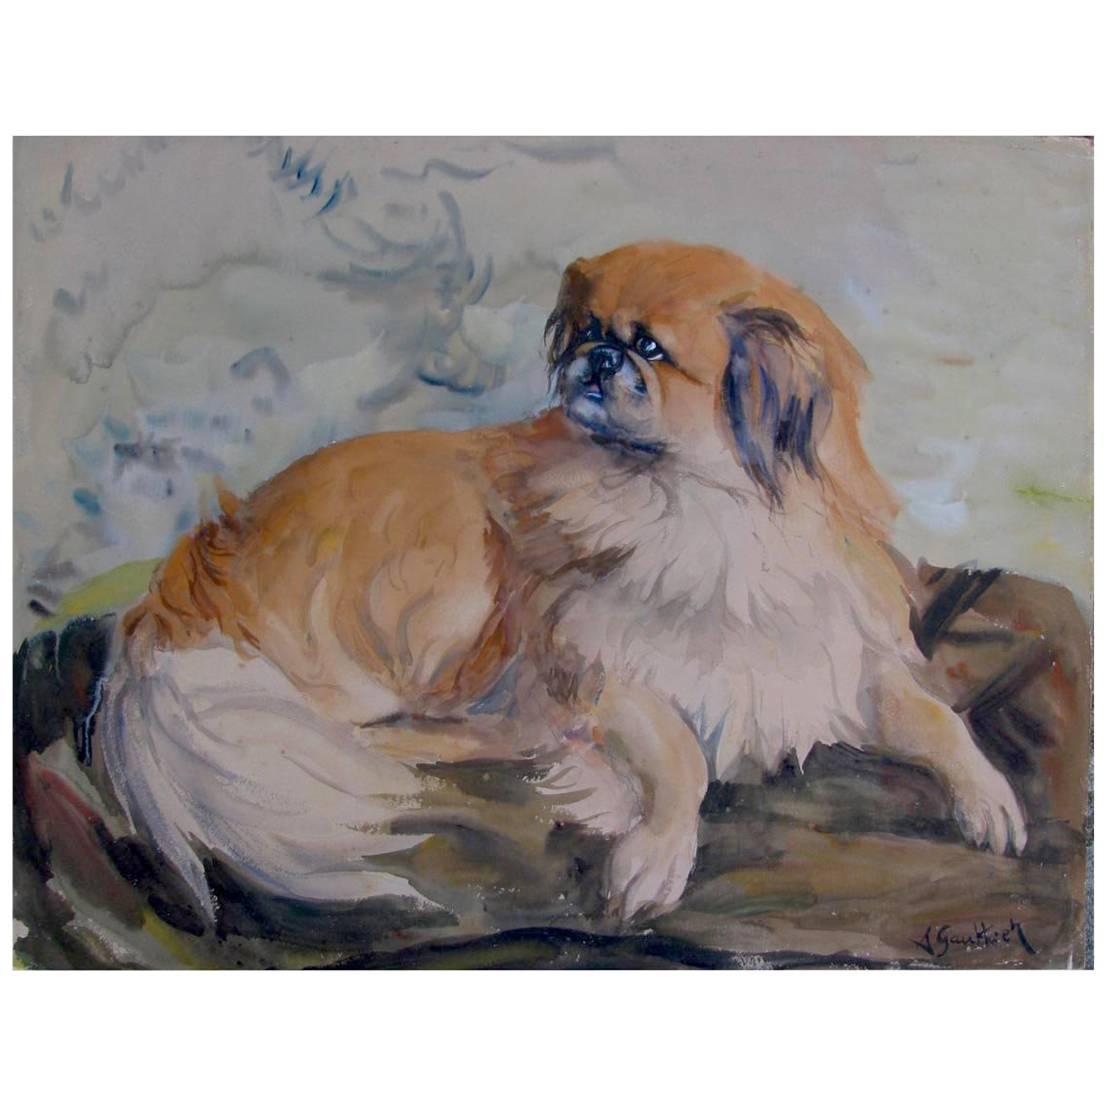 20th century portrait of Pekingese dog, a watercolor and tempera on paper painting, signed lower right by the French painter A.Gauthier and set in a modern gilt pinewood frame measuring 26 by 31,5 inches. 
The Pekingese dog, originated in China